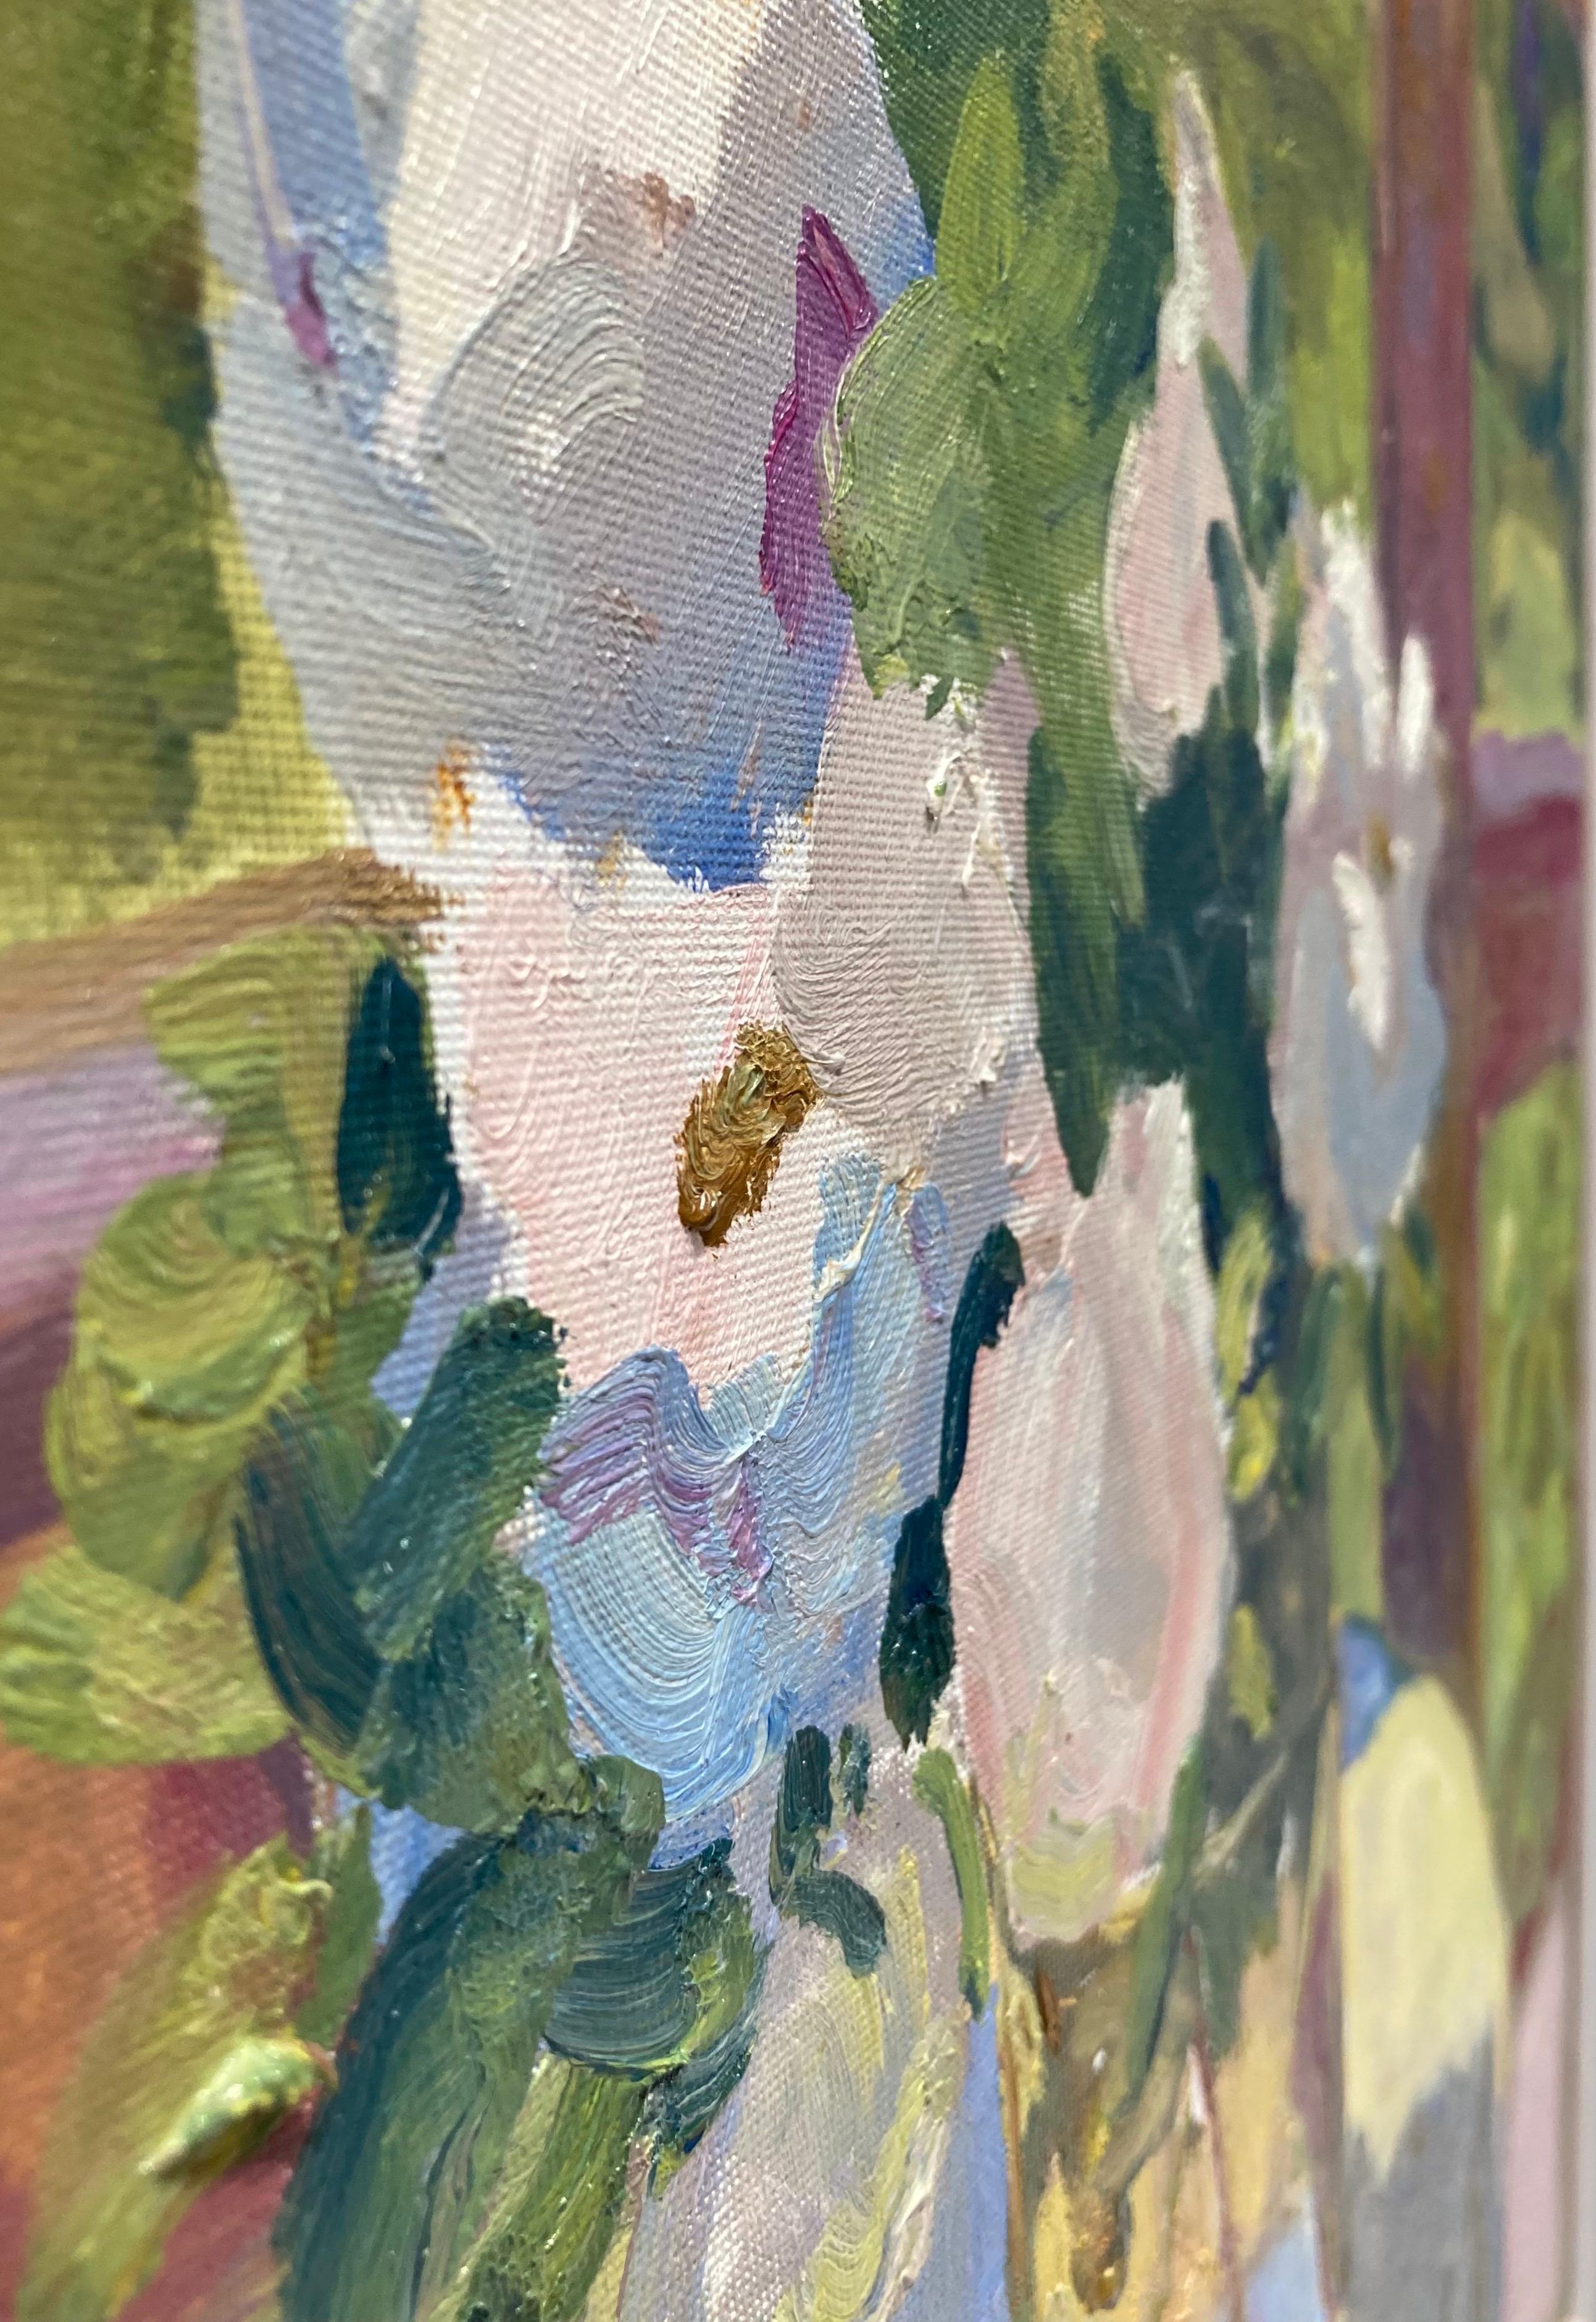 An impressionistic painting of a bouquet of roses in a reflective glass vase on a porch with a landscape in the background. Soft white and pink brushstrokes make up the roses. The light in the painting casts a dark shadow of the voluminous flowers